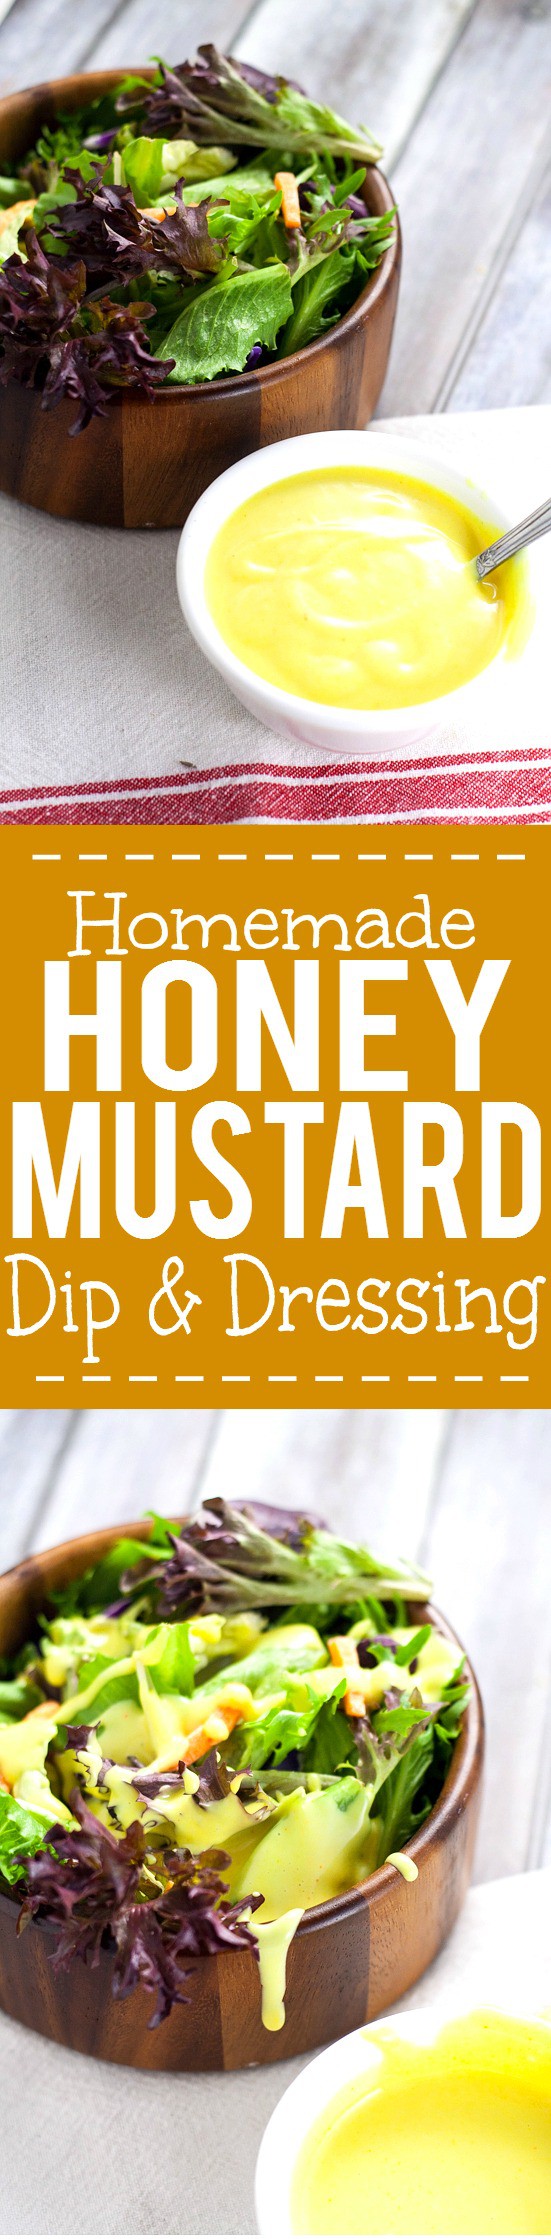 Homemade Honey Mustard Dipping Sauce and Salad Dressing recipe - Creamy, sweet, and tangy, this Homemade Honey Mustard Dipping Sauce will be your new favorite go-to sauce and dressing for EVERYTHING.  This is so good.  I absolutely LOVE dipping my chicken in it.